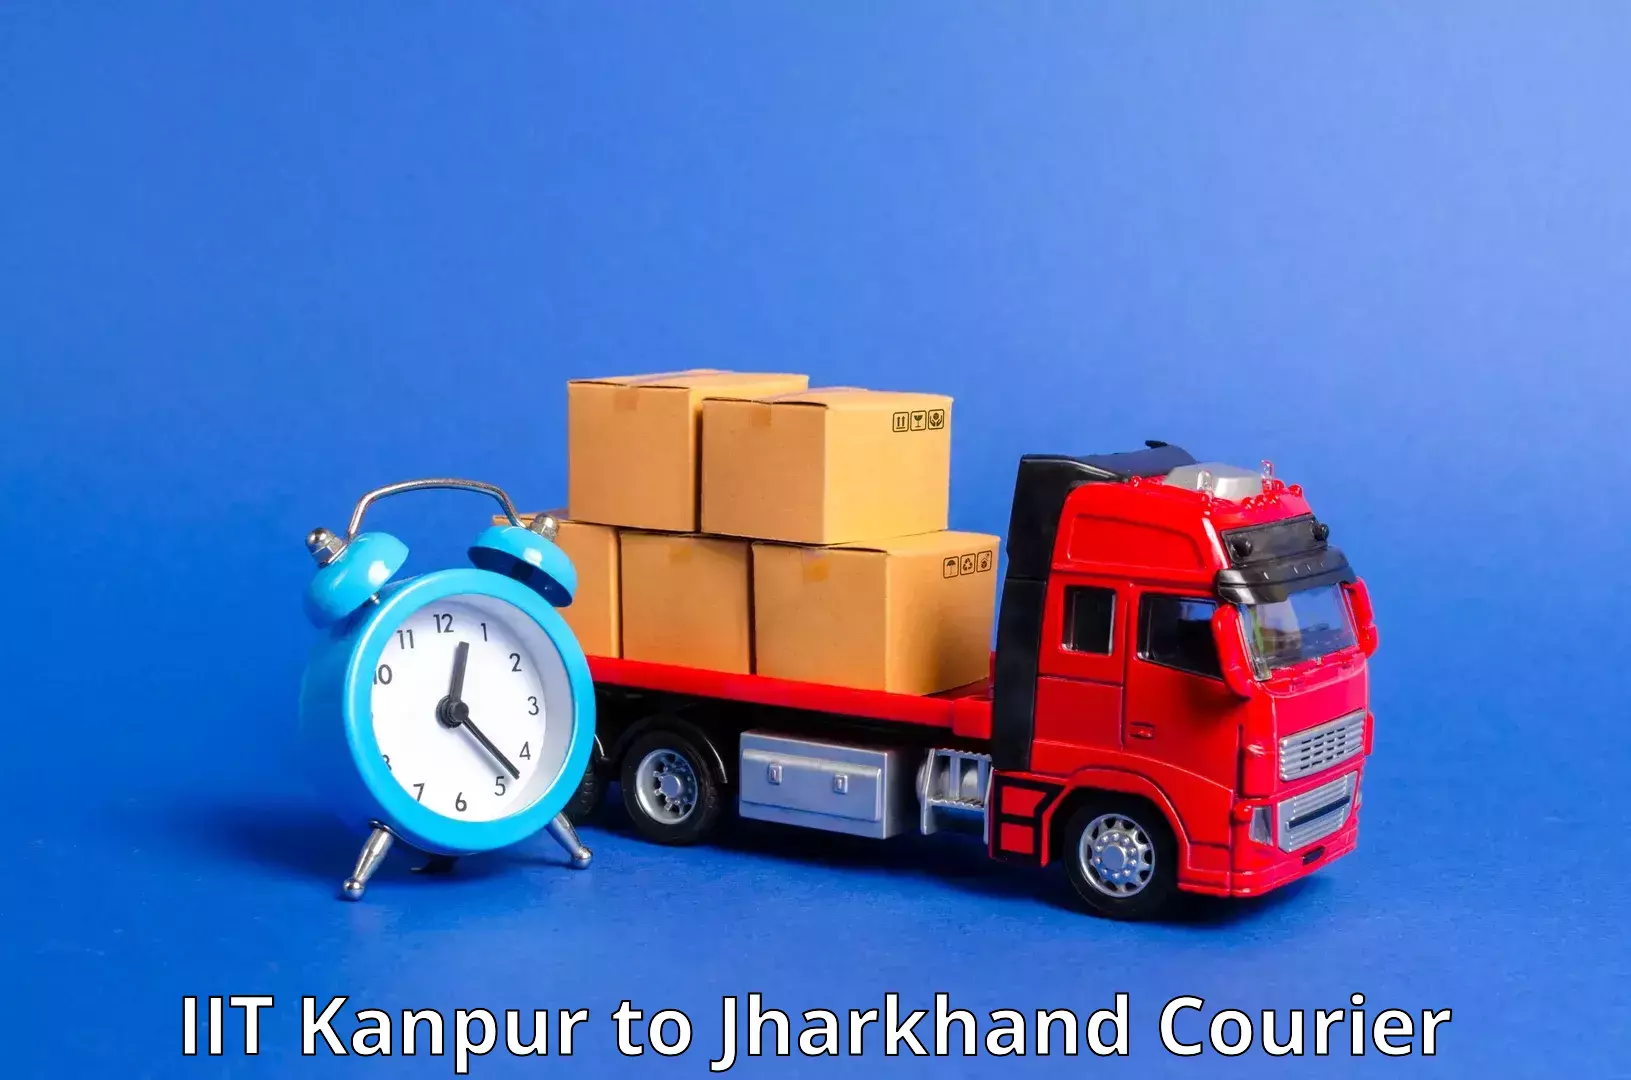 Nationwide courier service IIT Kanpur to Peterbar